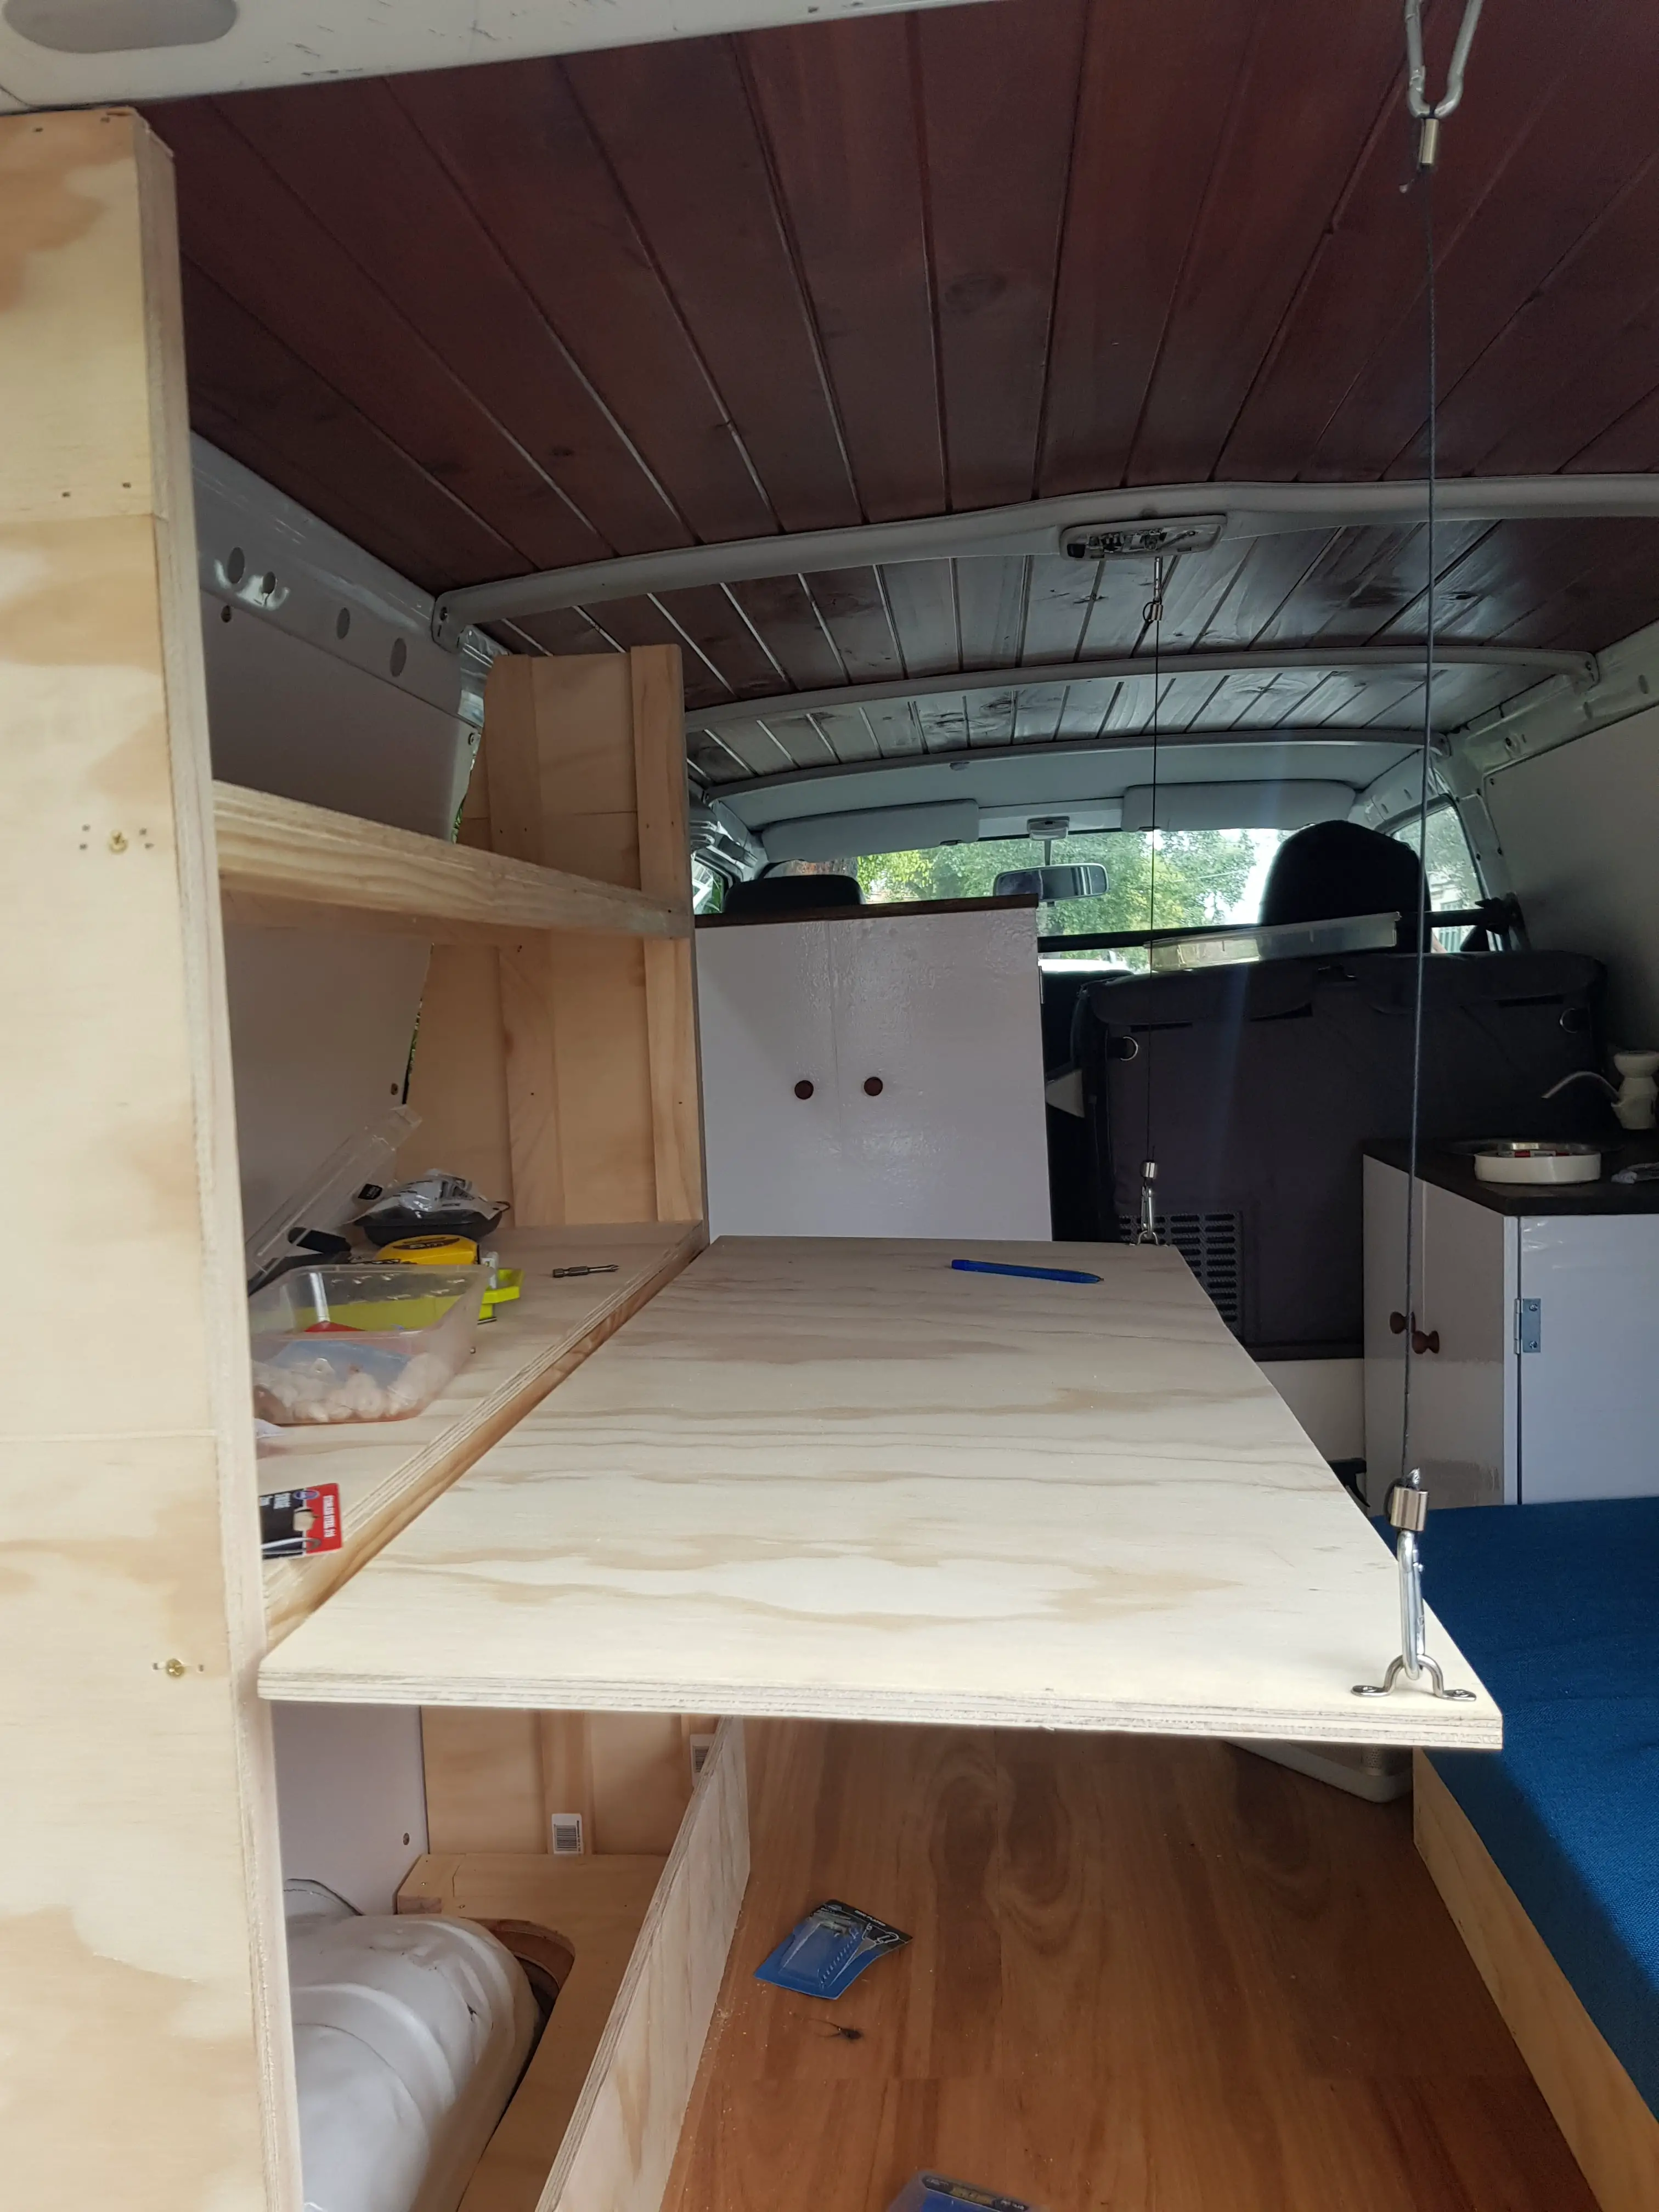 fold out table from a shelf in a camper van